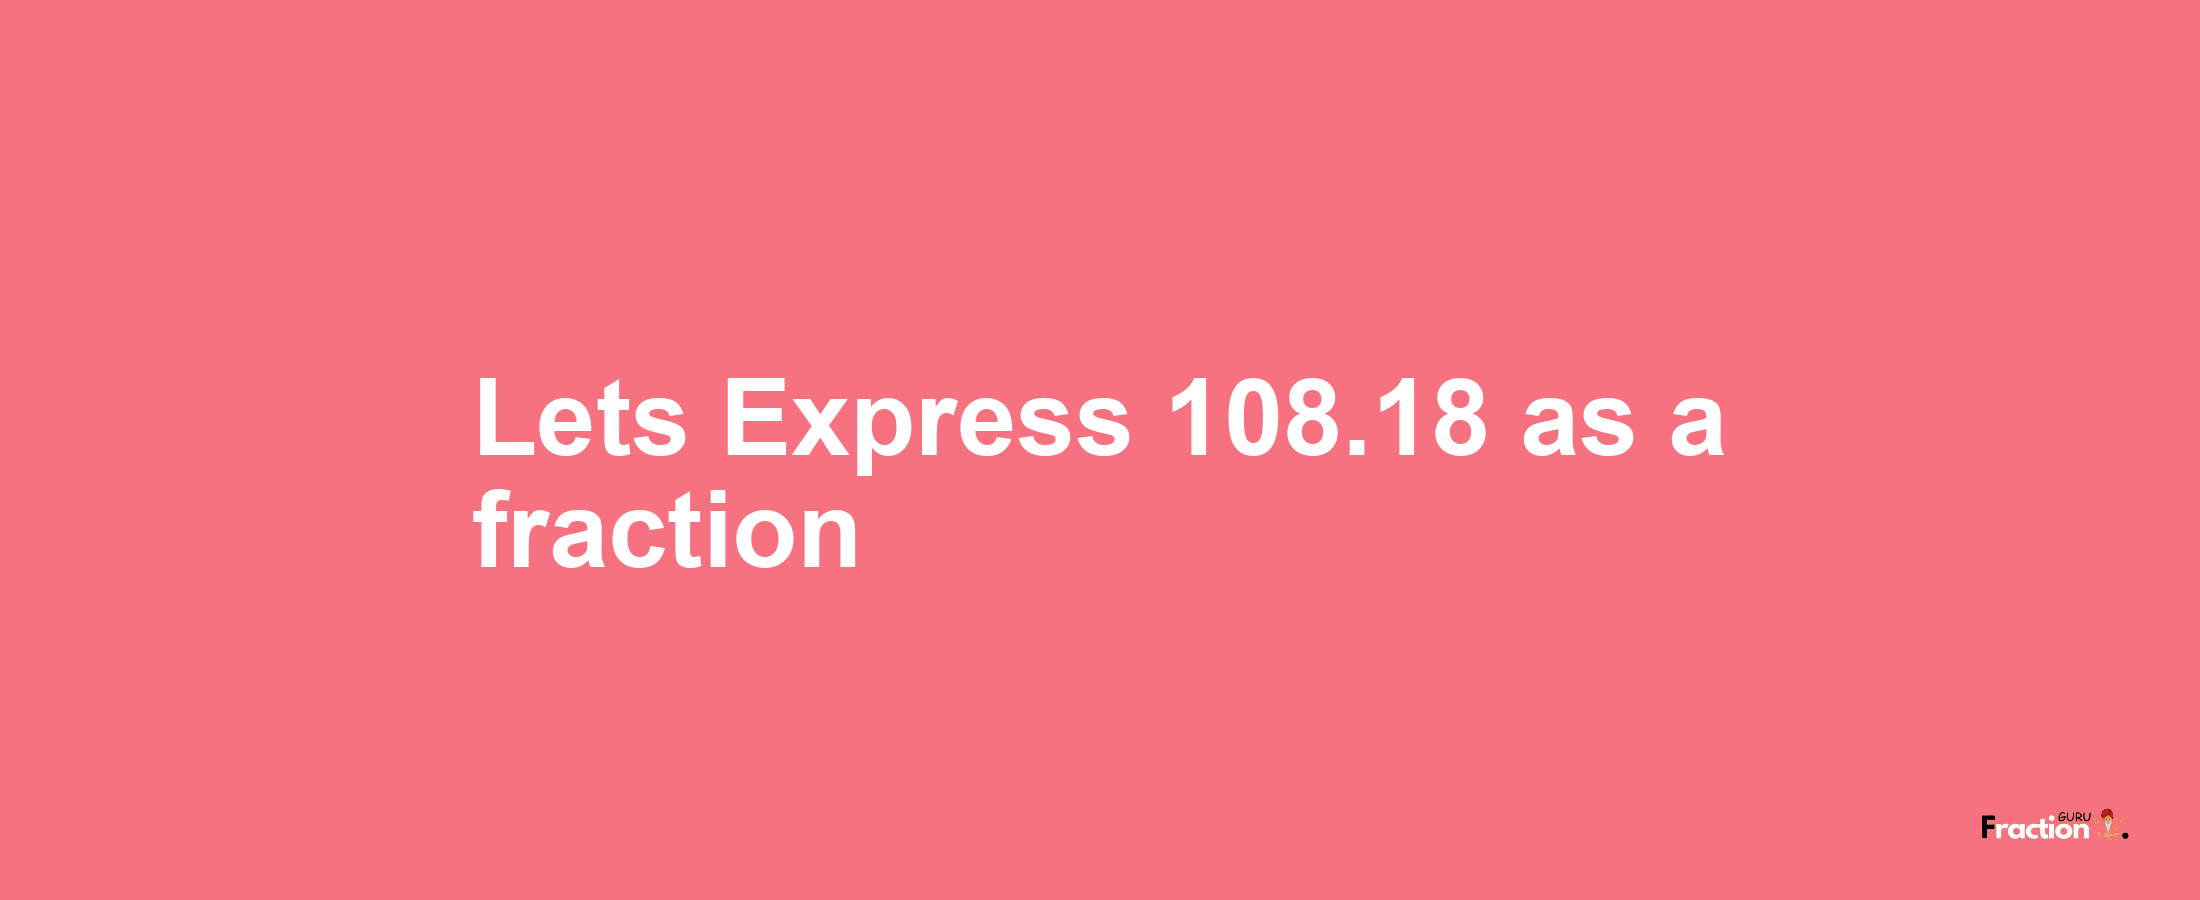 Lets Express 108.18 as afraction